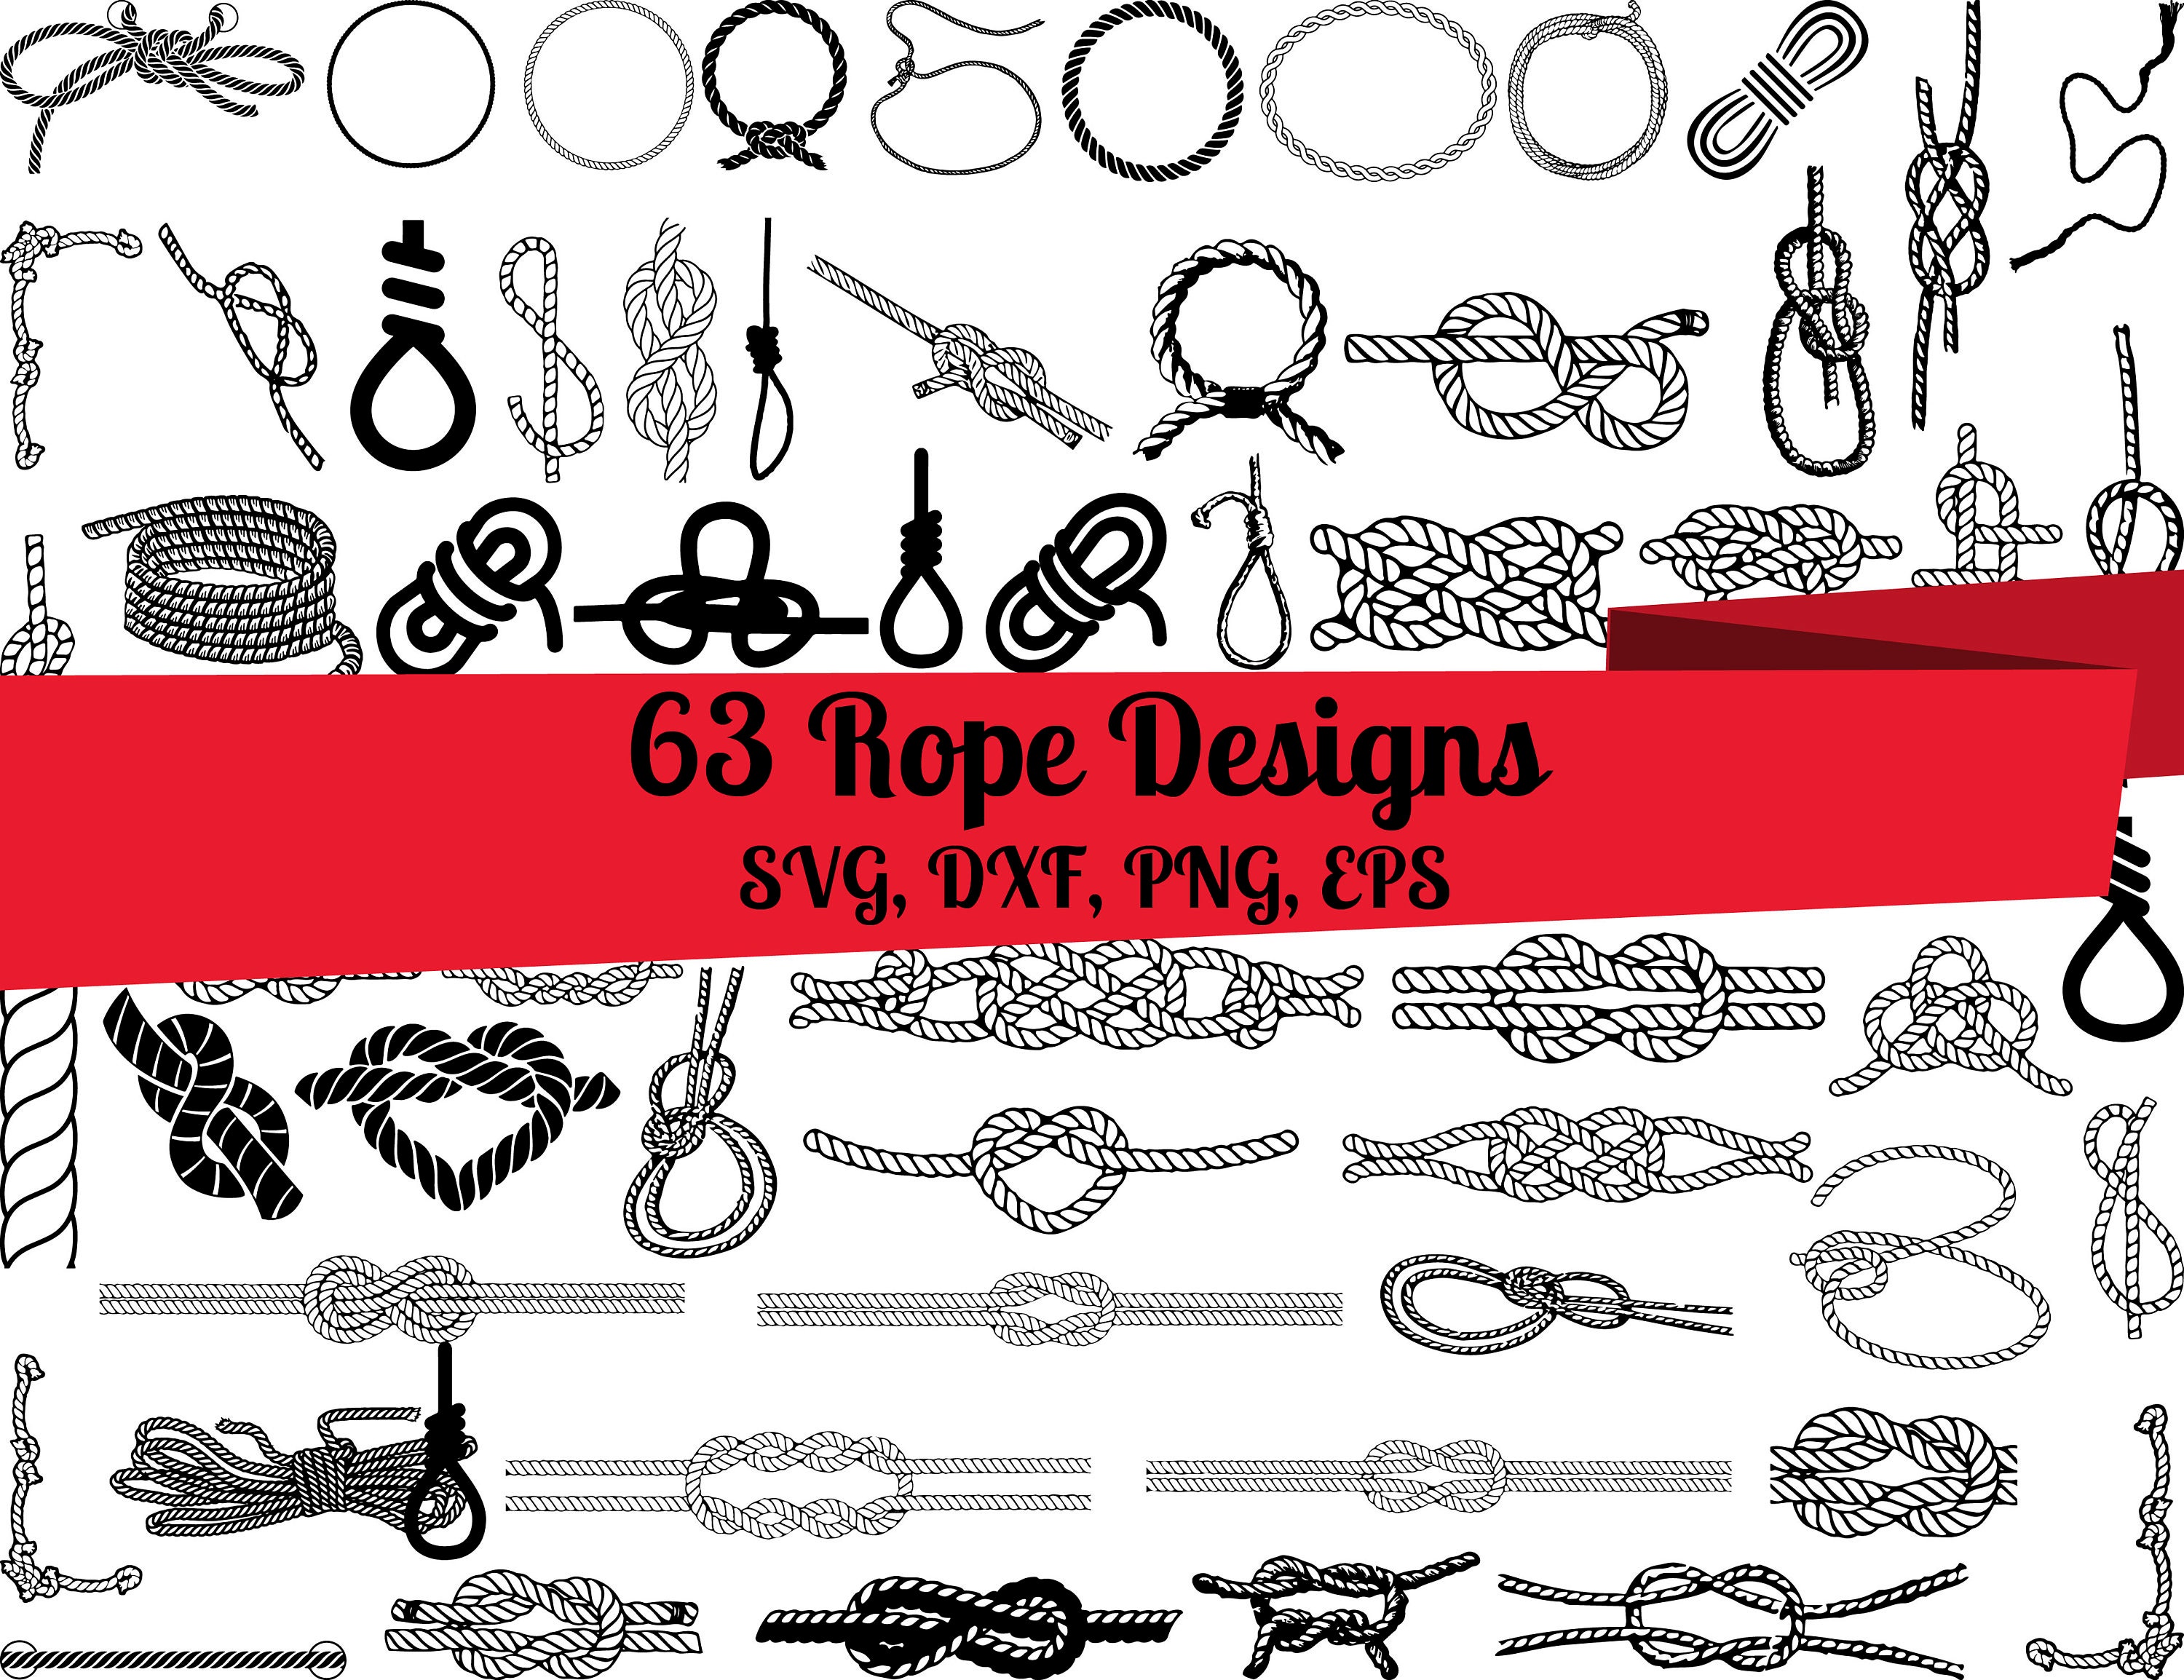 Nautical Rope Knot SVG Cut File, DXF PNG Eps, Marine Rope Knot Svg